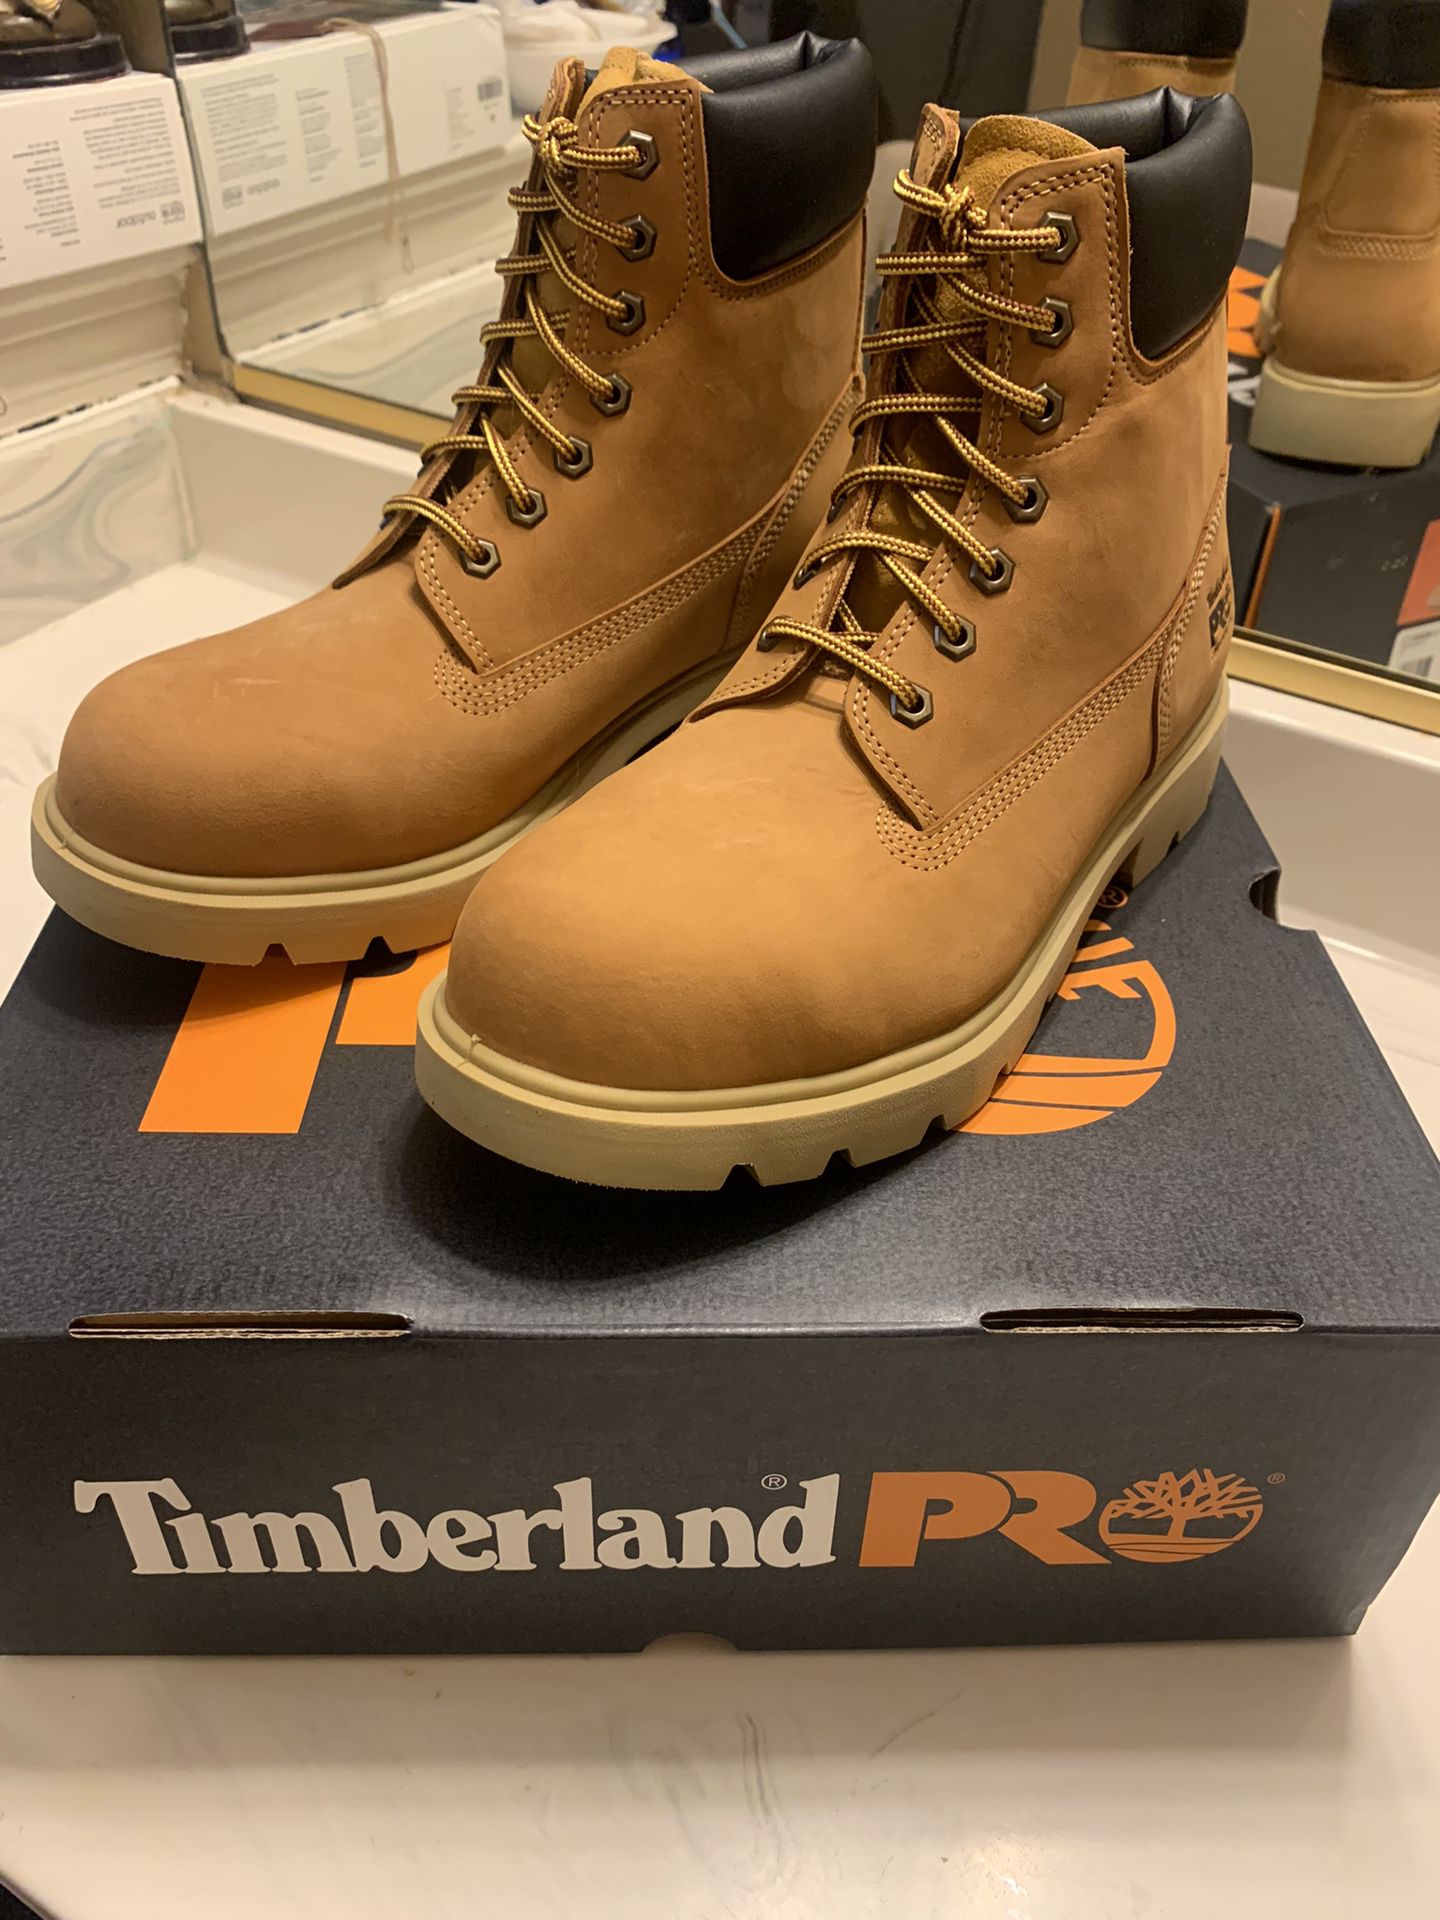 Timberland Pro Work Boots Composite 6”